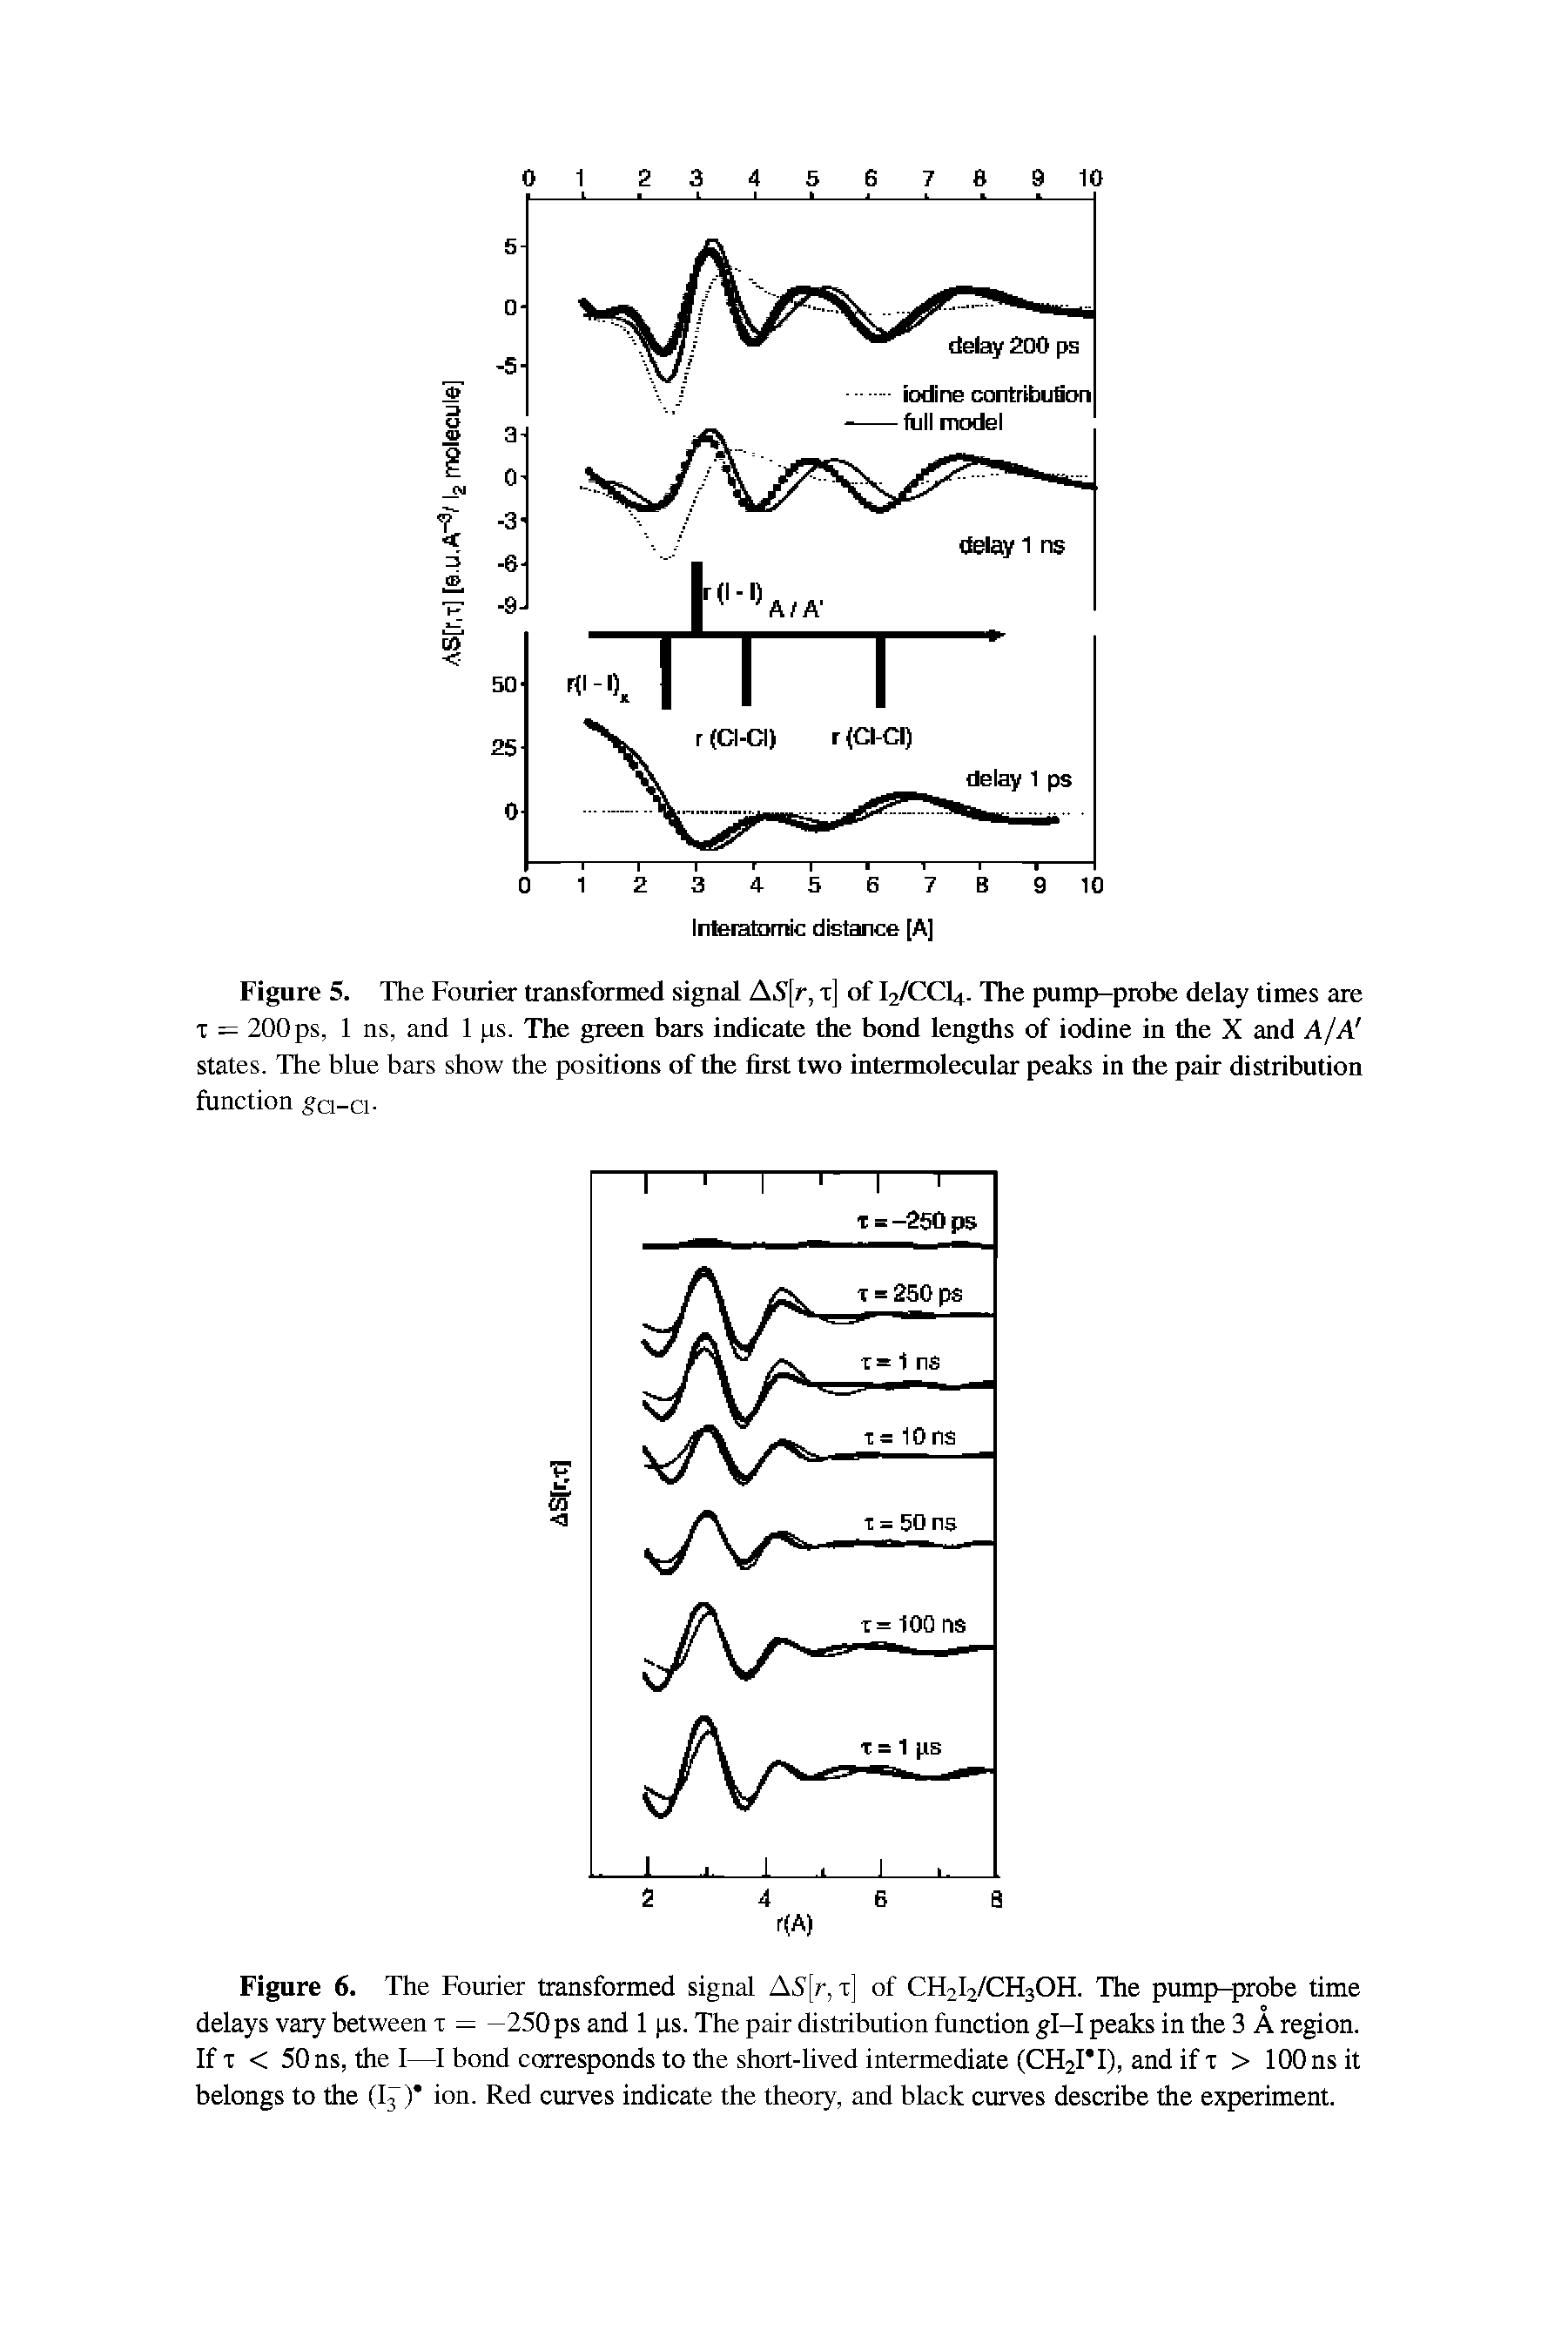 Figure 6. The Fourier transformed signal AS[r, i] of CH2I2/CH3OH. The pump-probe time delays vary between i = —250 ps and 1 ps. The pair distribution function gl-I peaks in the 3 A region. If T < 50 ns, the I—I bond corresponds to the short-lived intermediate (CH2ri), and if x > 100 ns it belongs to the (I3") ion. Red curves indicate the theory, and black curves describe the experiment.